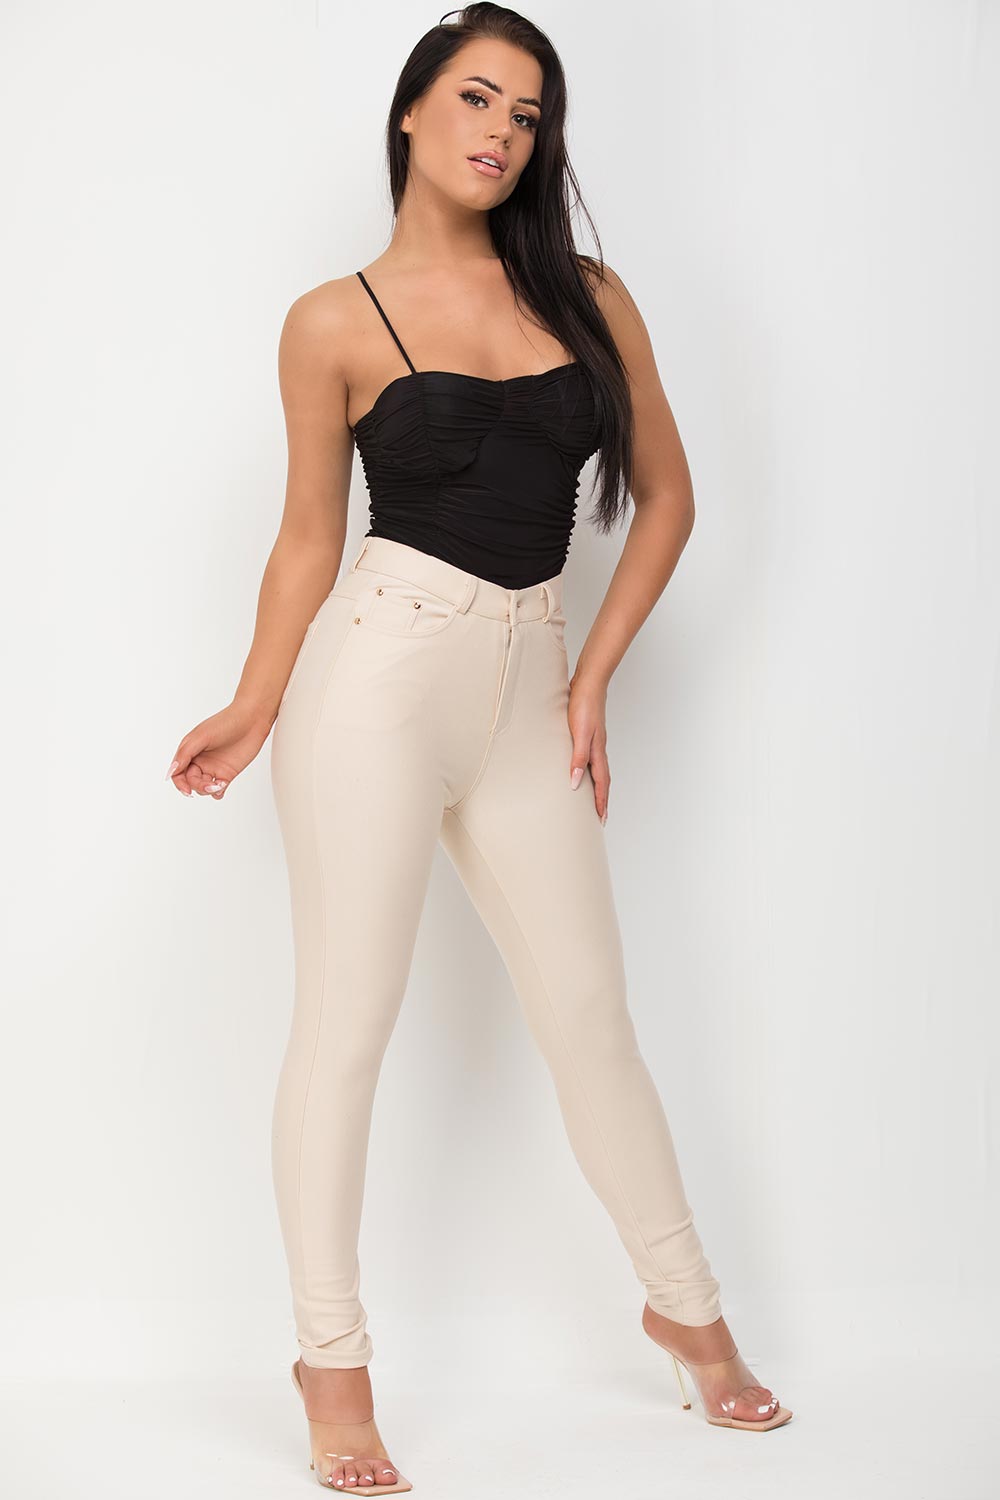 Cream Trousers  Buy Cream Trousers online in India